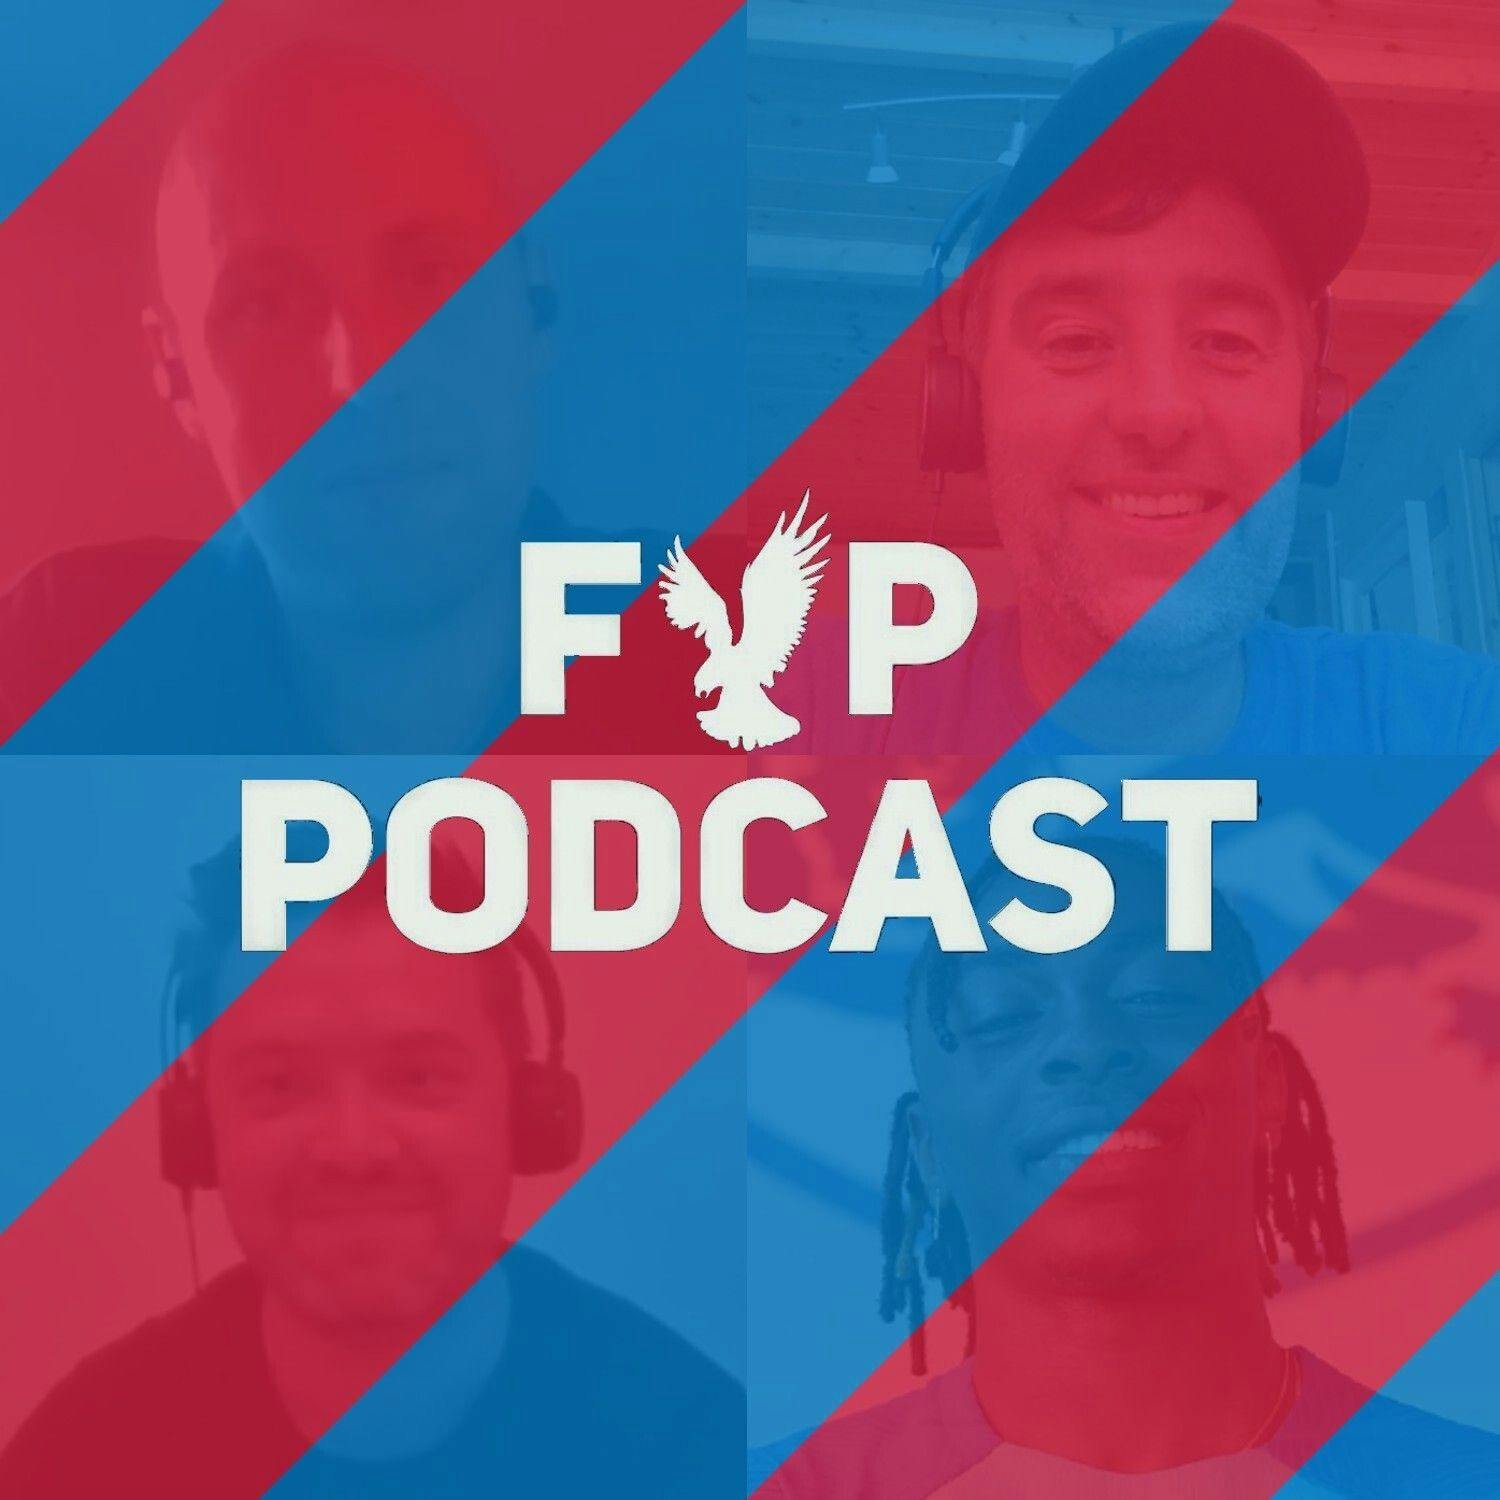 FYP Podcast 477 | Ebere Eze’s Journey (with Clive Whittingham of Loft For Words)